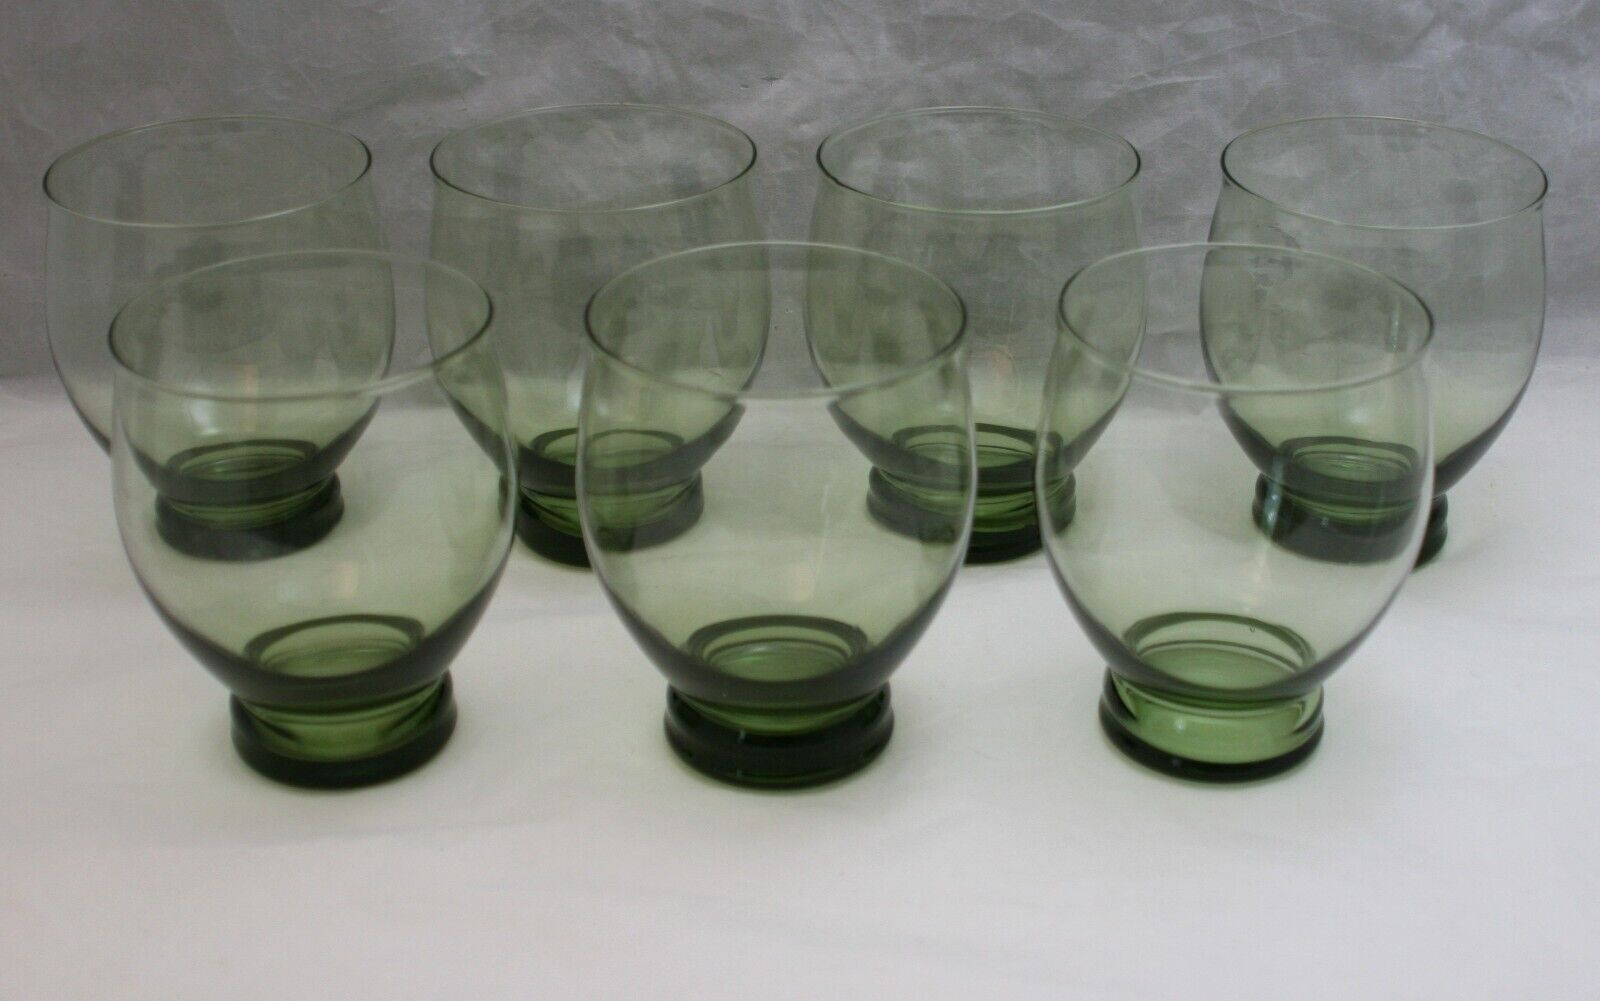 Vintage Large Footed Green Drinking Glasses Water Goblets Tulip Shaped Set of 7